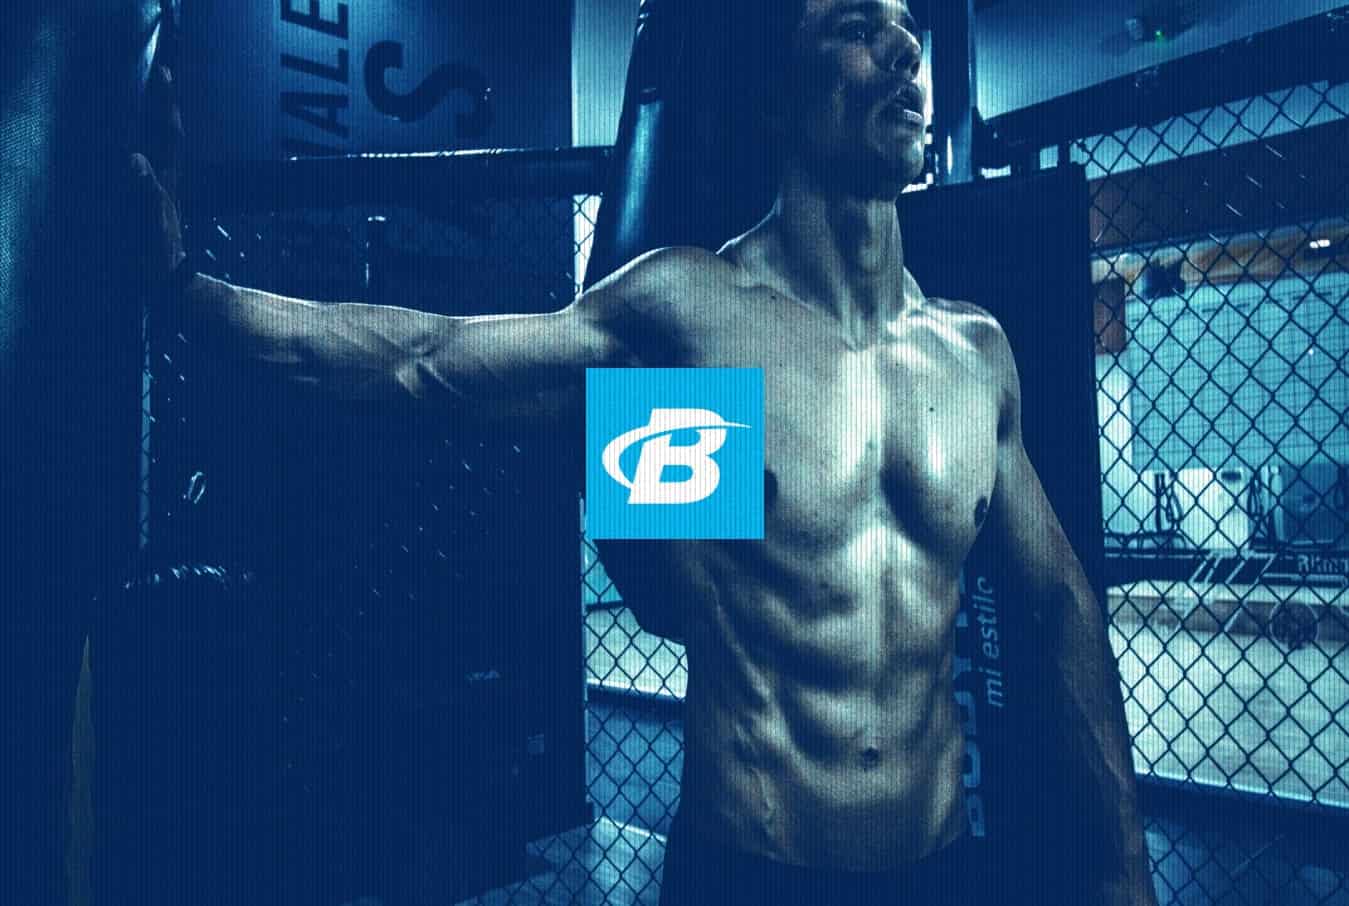 Bodybuilding.com suffers data breach; issues password reset for all users